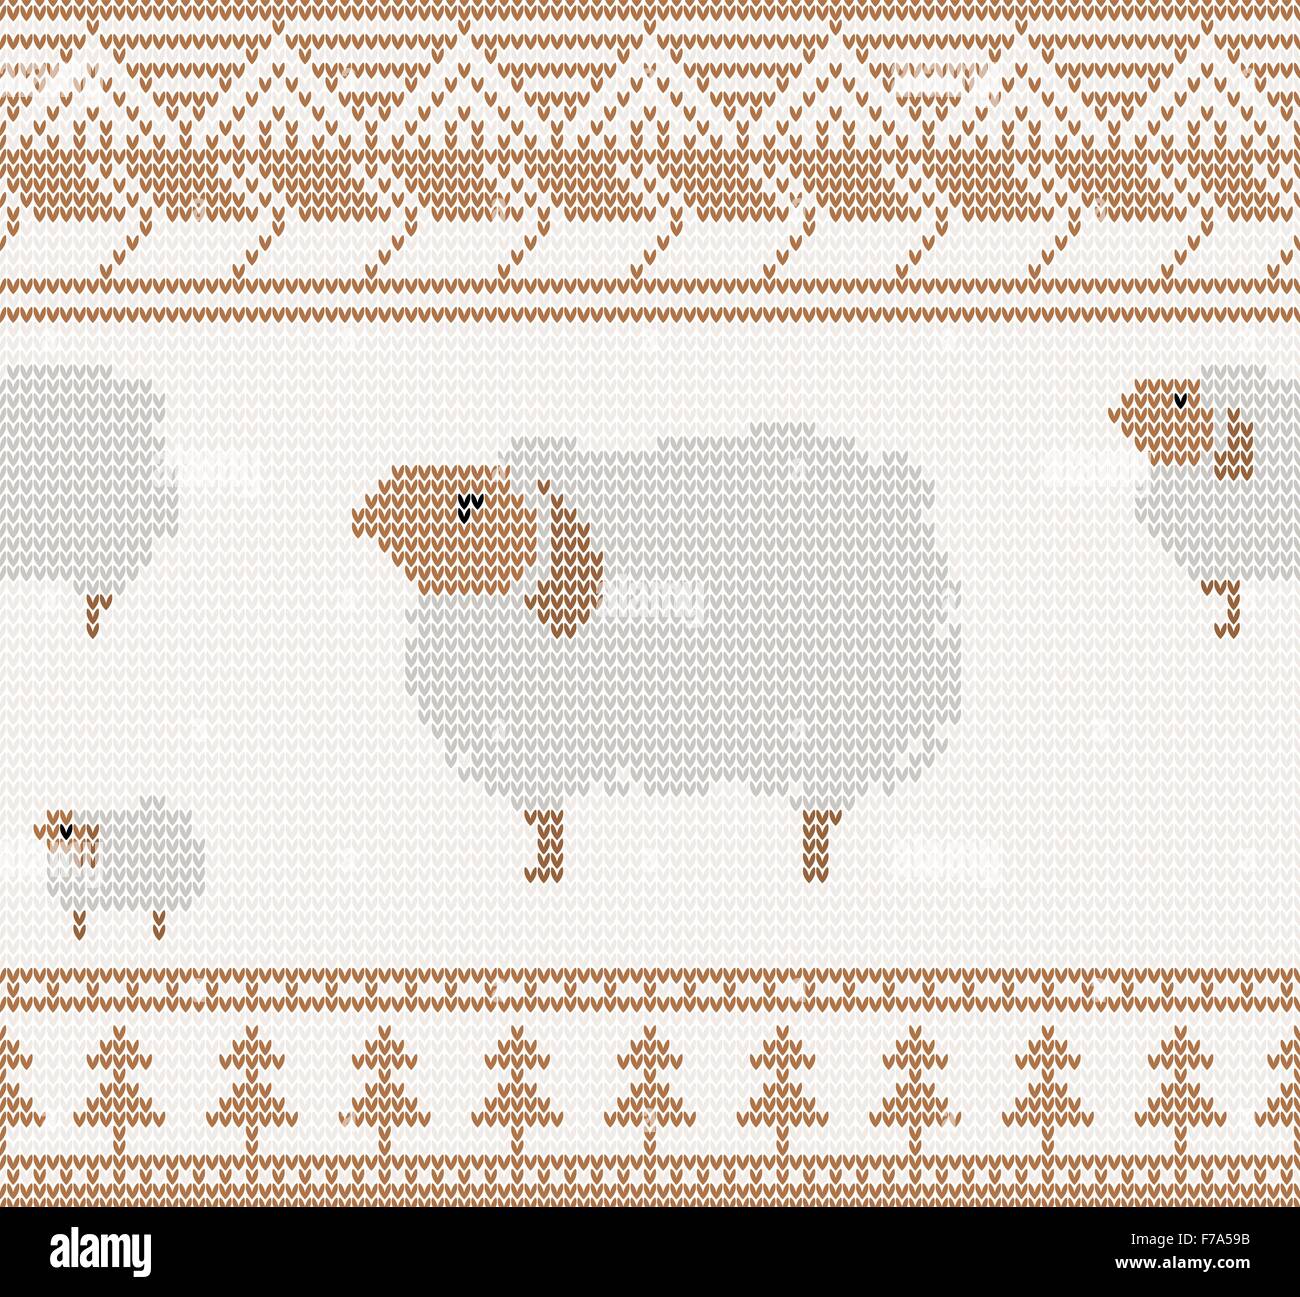 knitted pattern with sheep seamless vector illustration Stock Vector